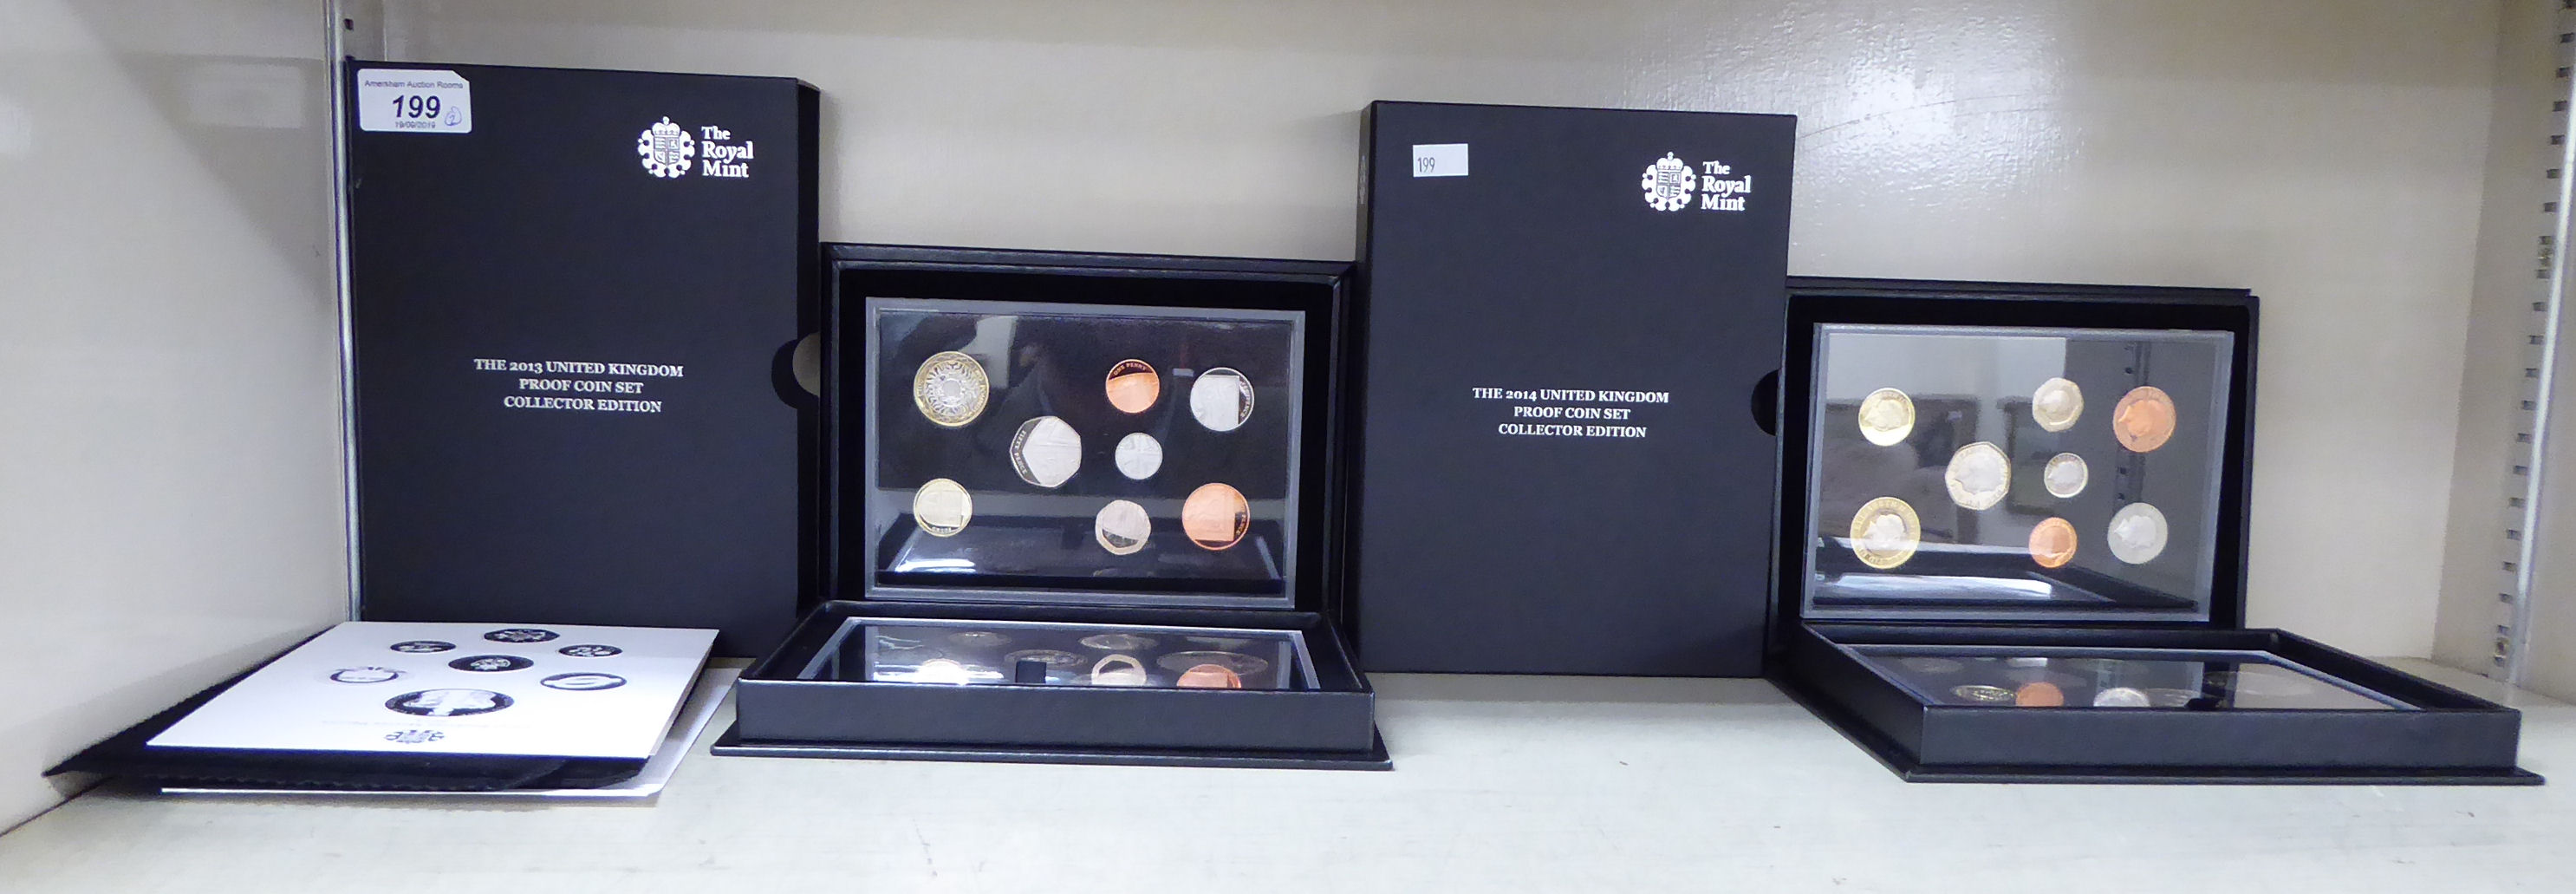 Two Royal Mint United Kingdom Collector's Edition proof coin sets 2013 & 2014 CS